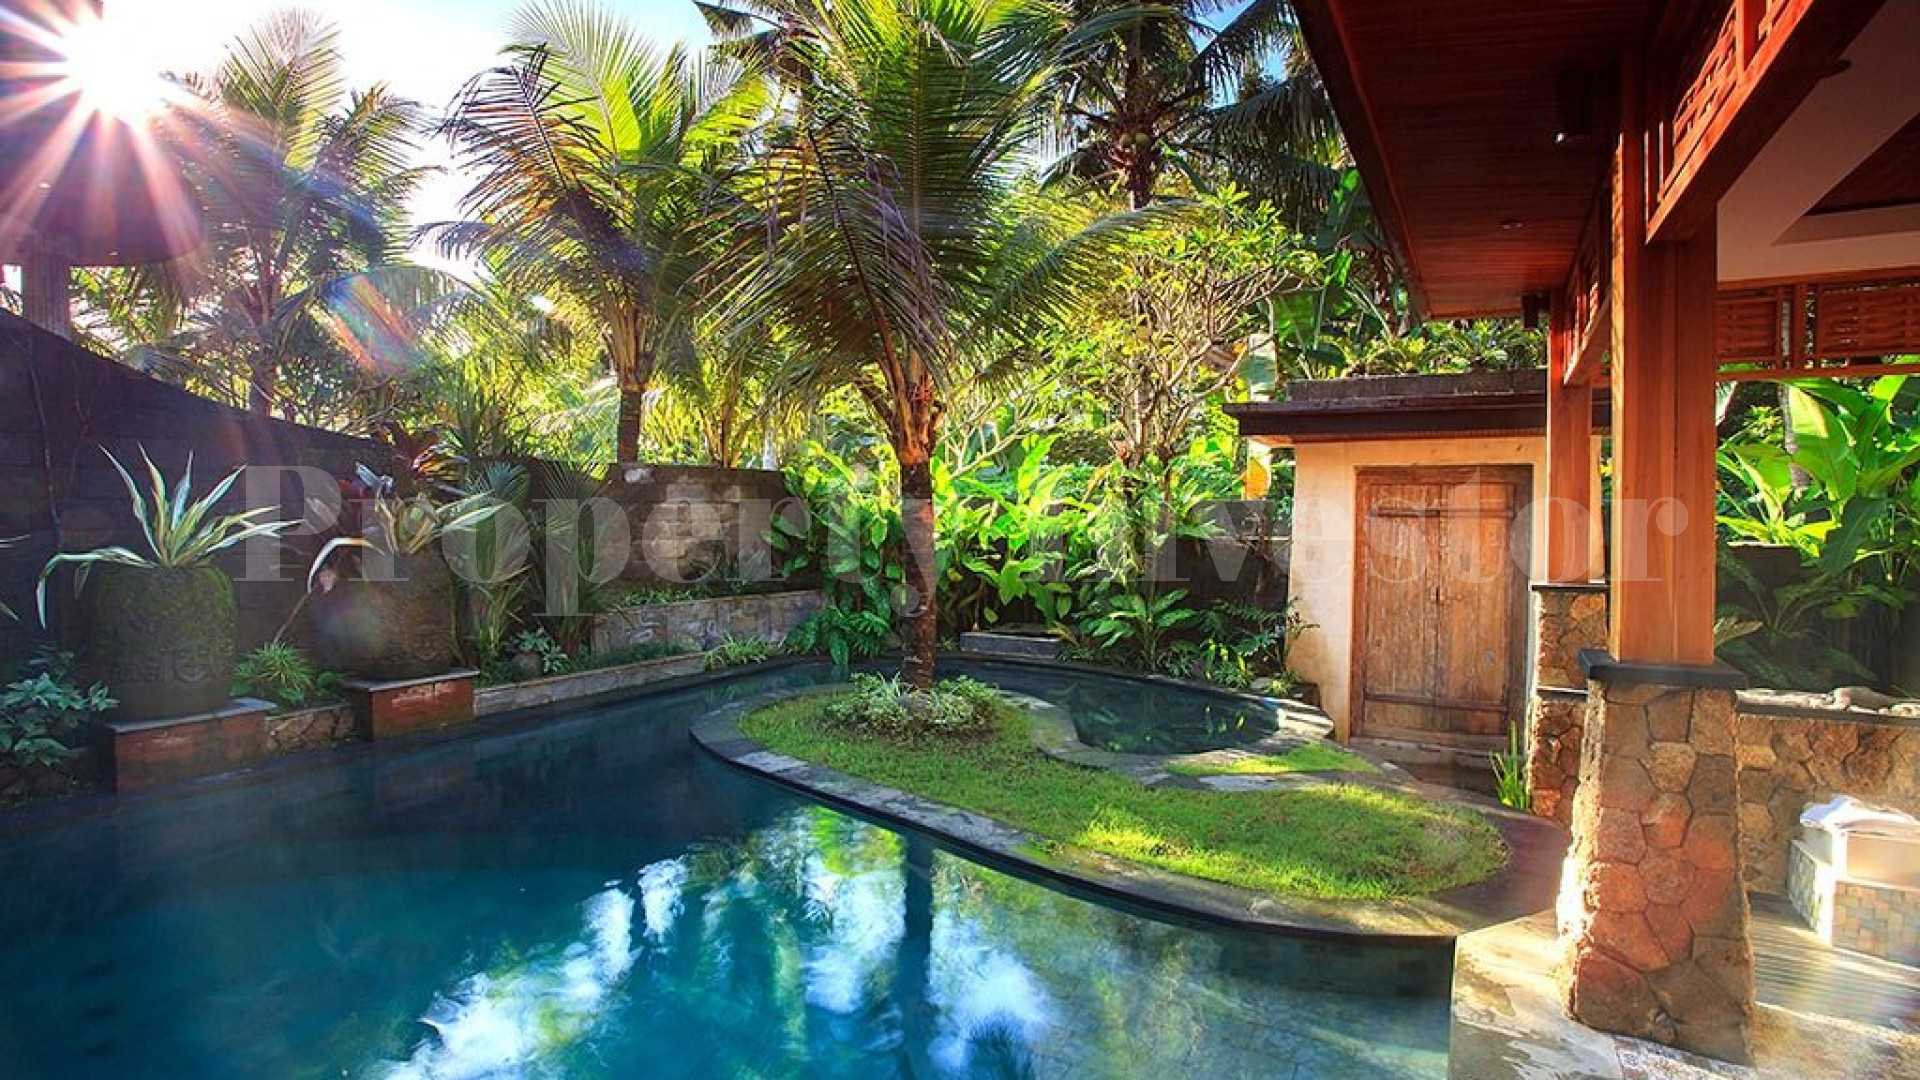 Perfectly Located 4 Villa/8 Bedroom Traditional Boutique Hotel for Sale in North Ubud, Bali